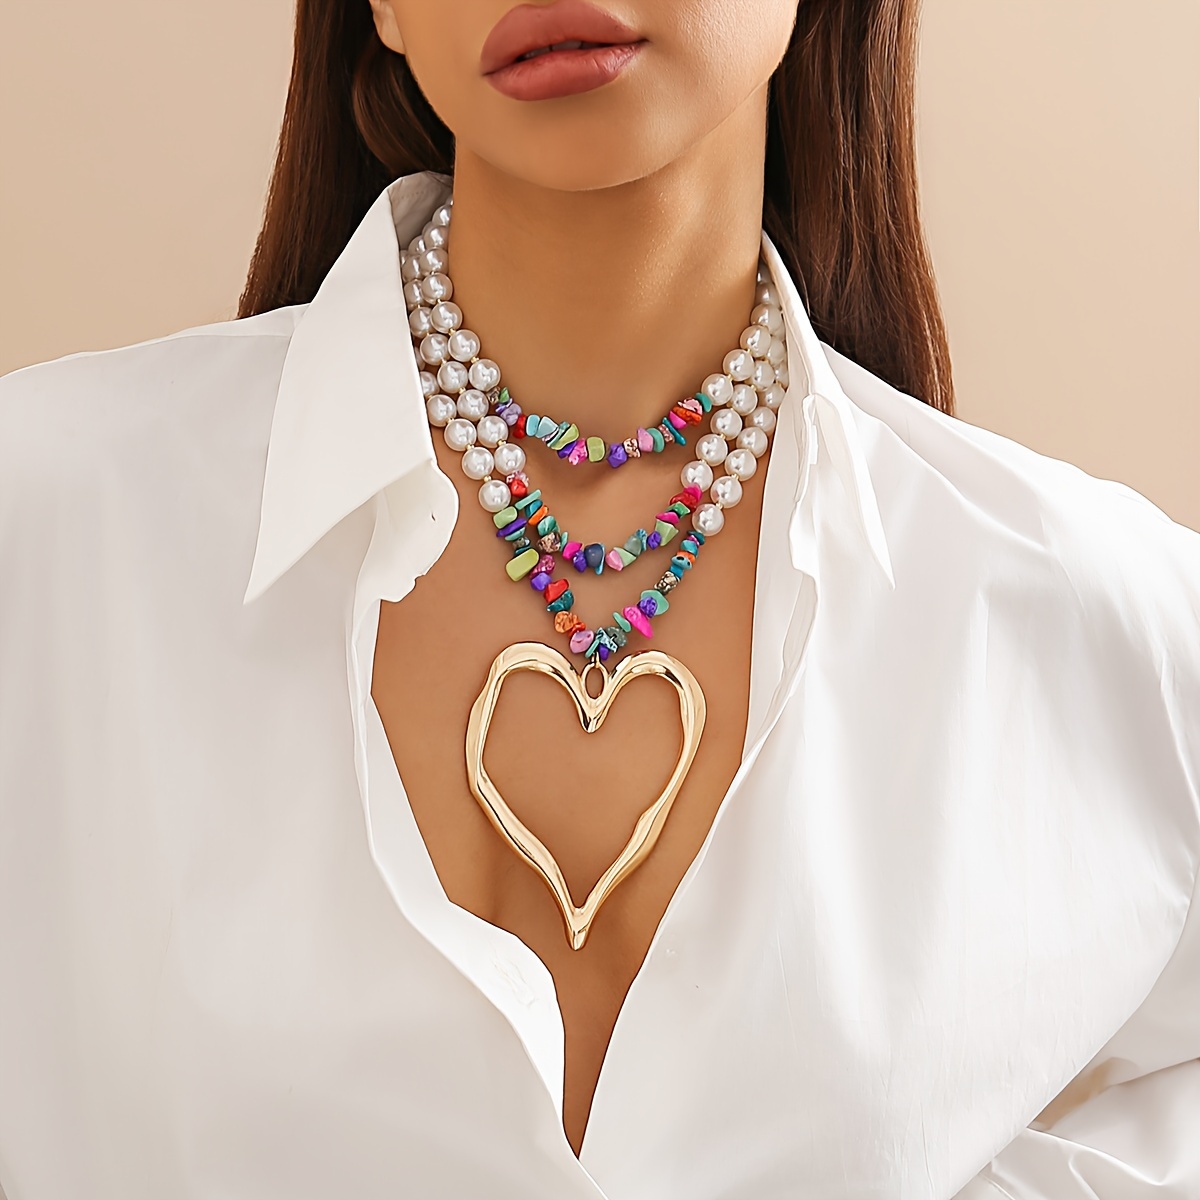 

1pc Bohemian Style Statement Necklace With Large Vintage Heart Pendant, Fashionable Layered Faux Pearl And Turquoise Beads, Women's Multi-strand Necklace Accessories Perfect For Vacation & Party